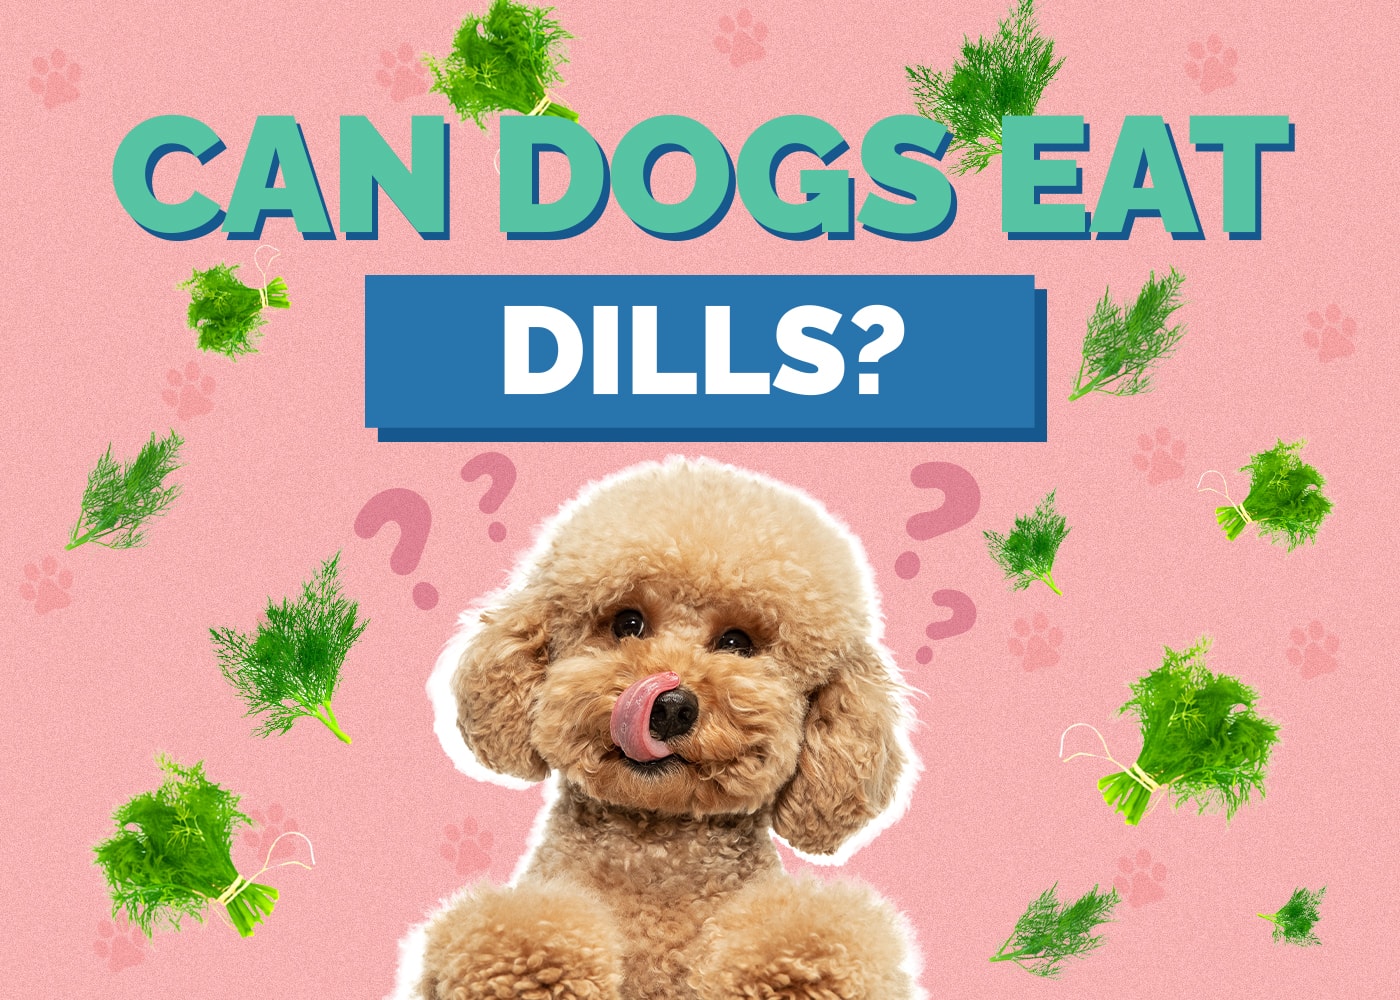 Can Dog Eat dills